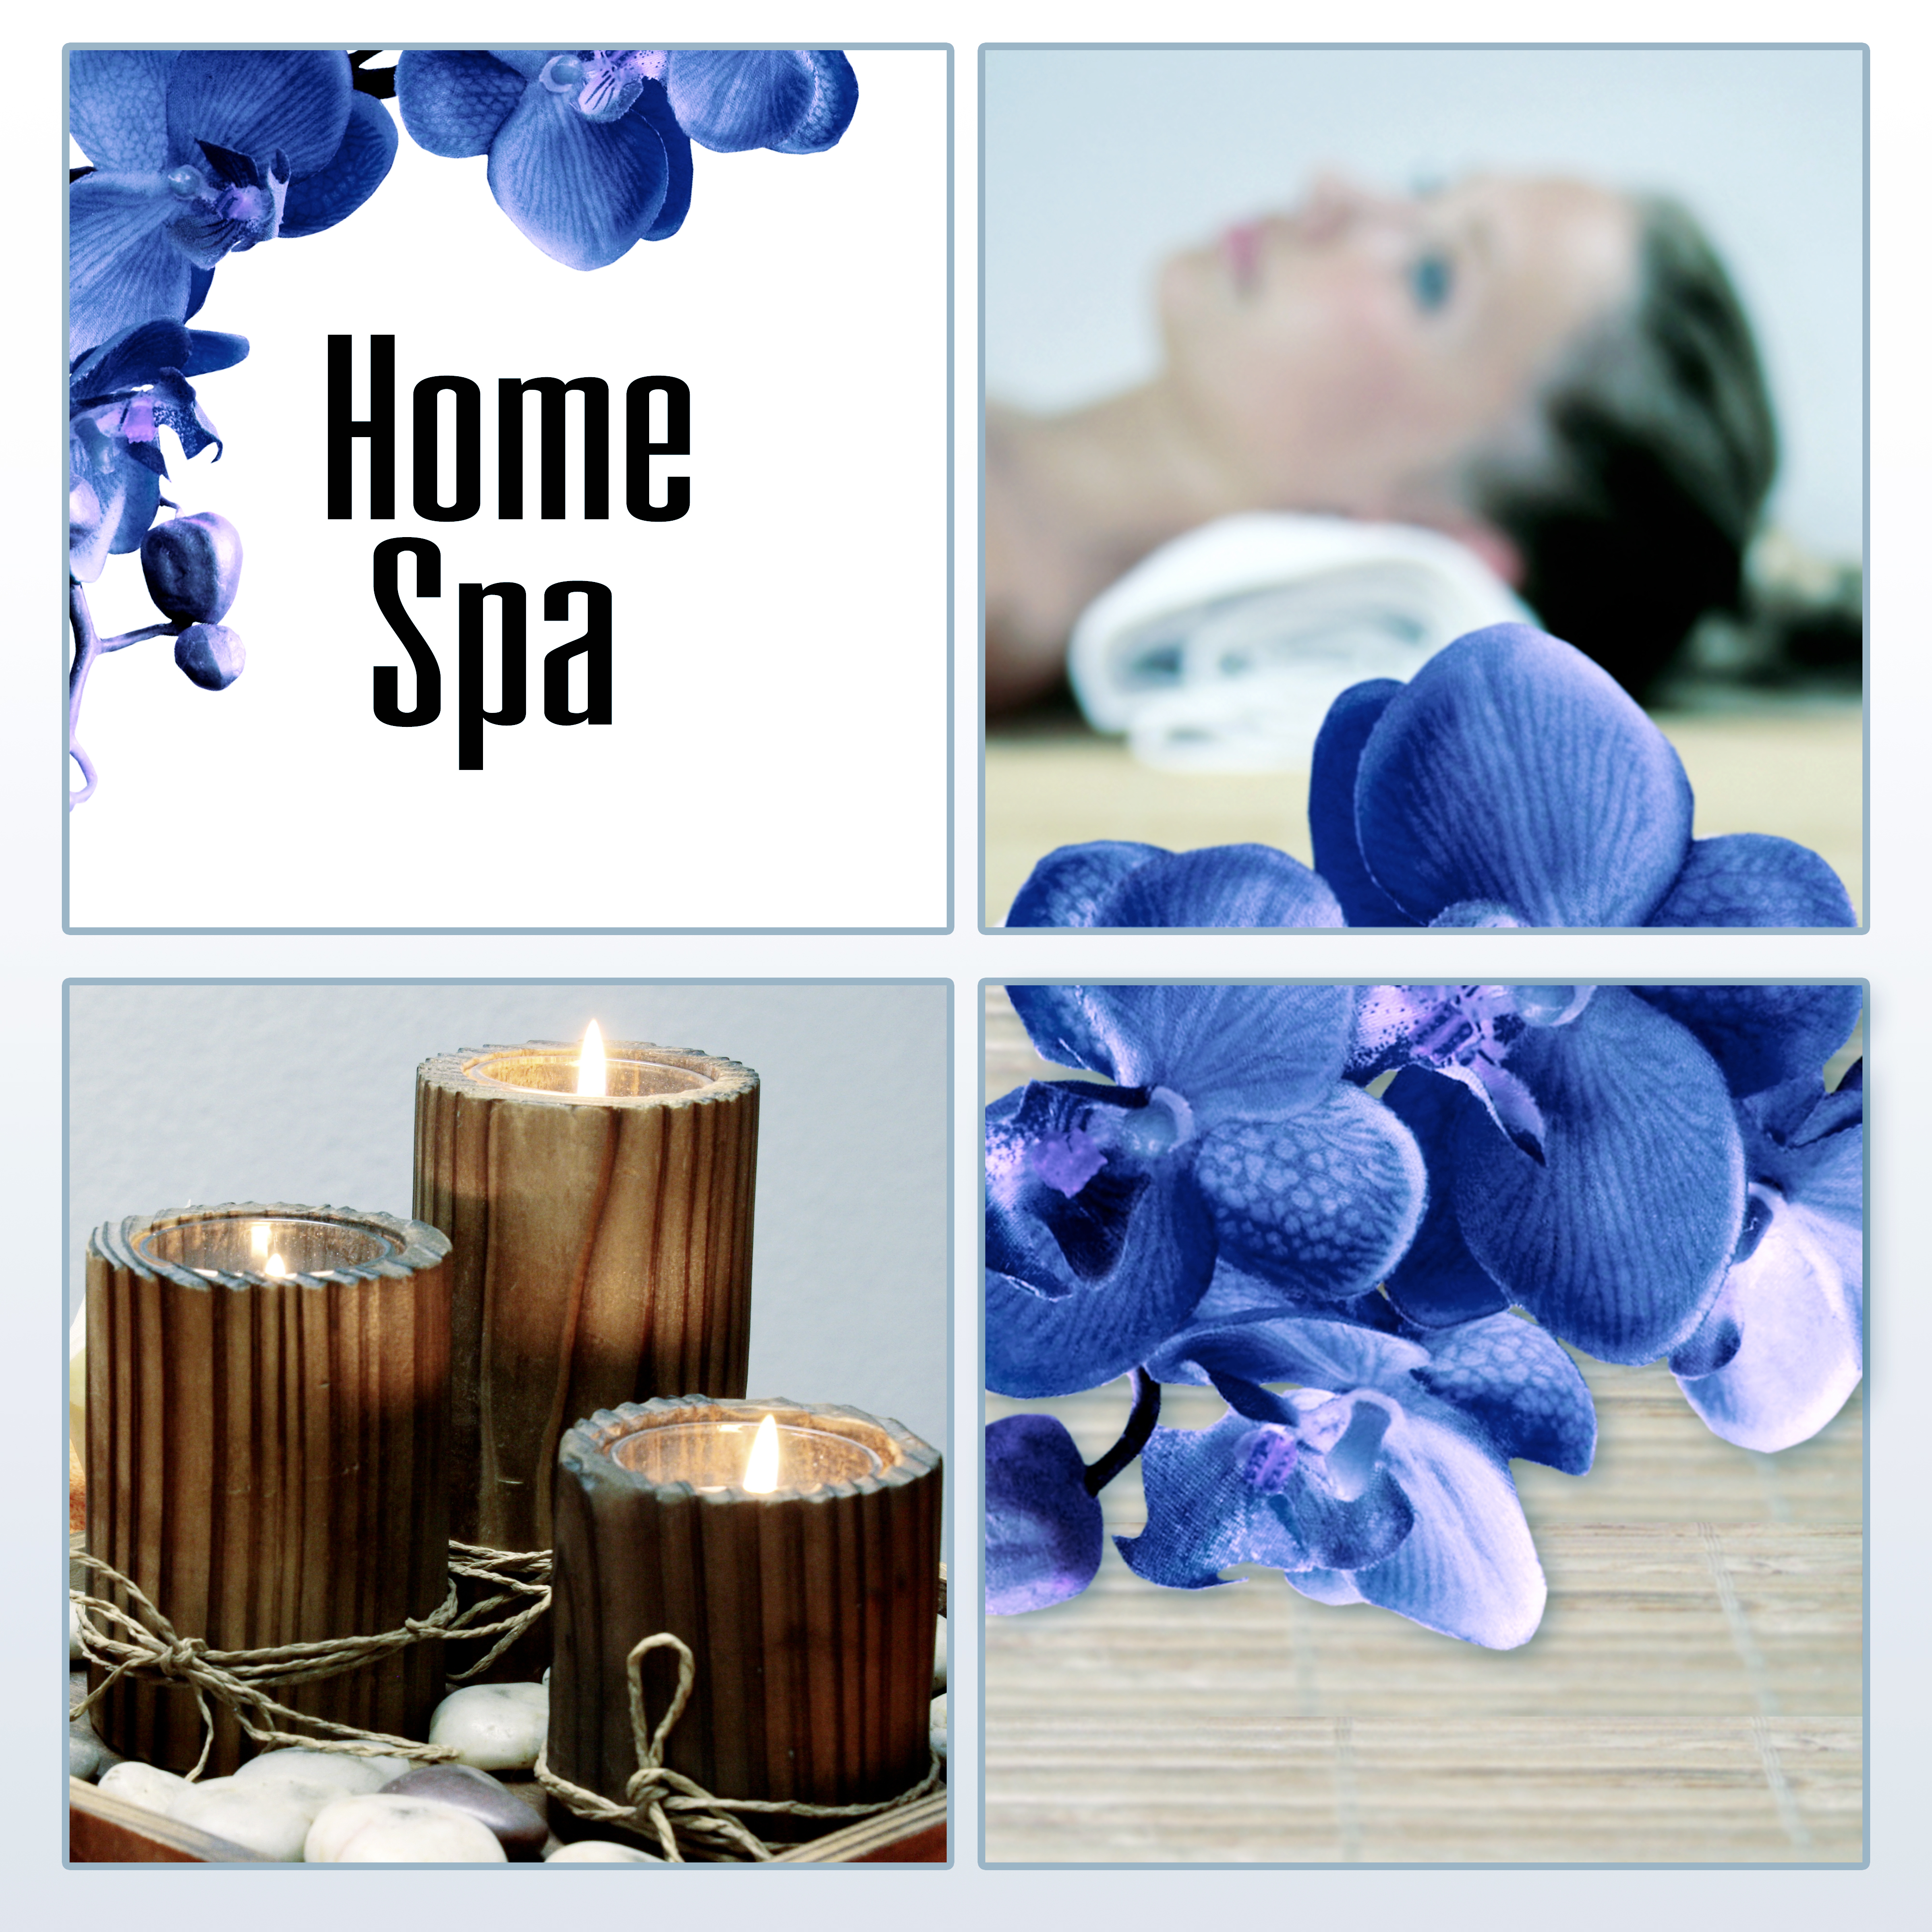 Home Spa - Best Sleep Music Therapy, Stress Relief, Deep Sleep and Sensual Sounds, New Age for Insomnia, Massage Healing, Relaxation & Meditation